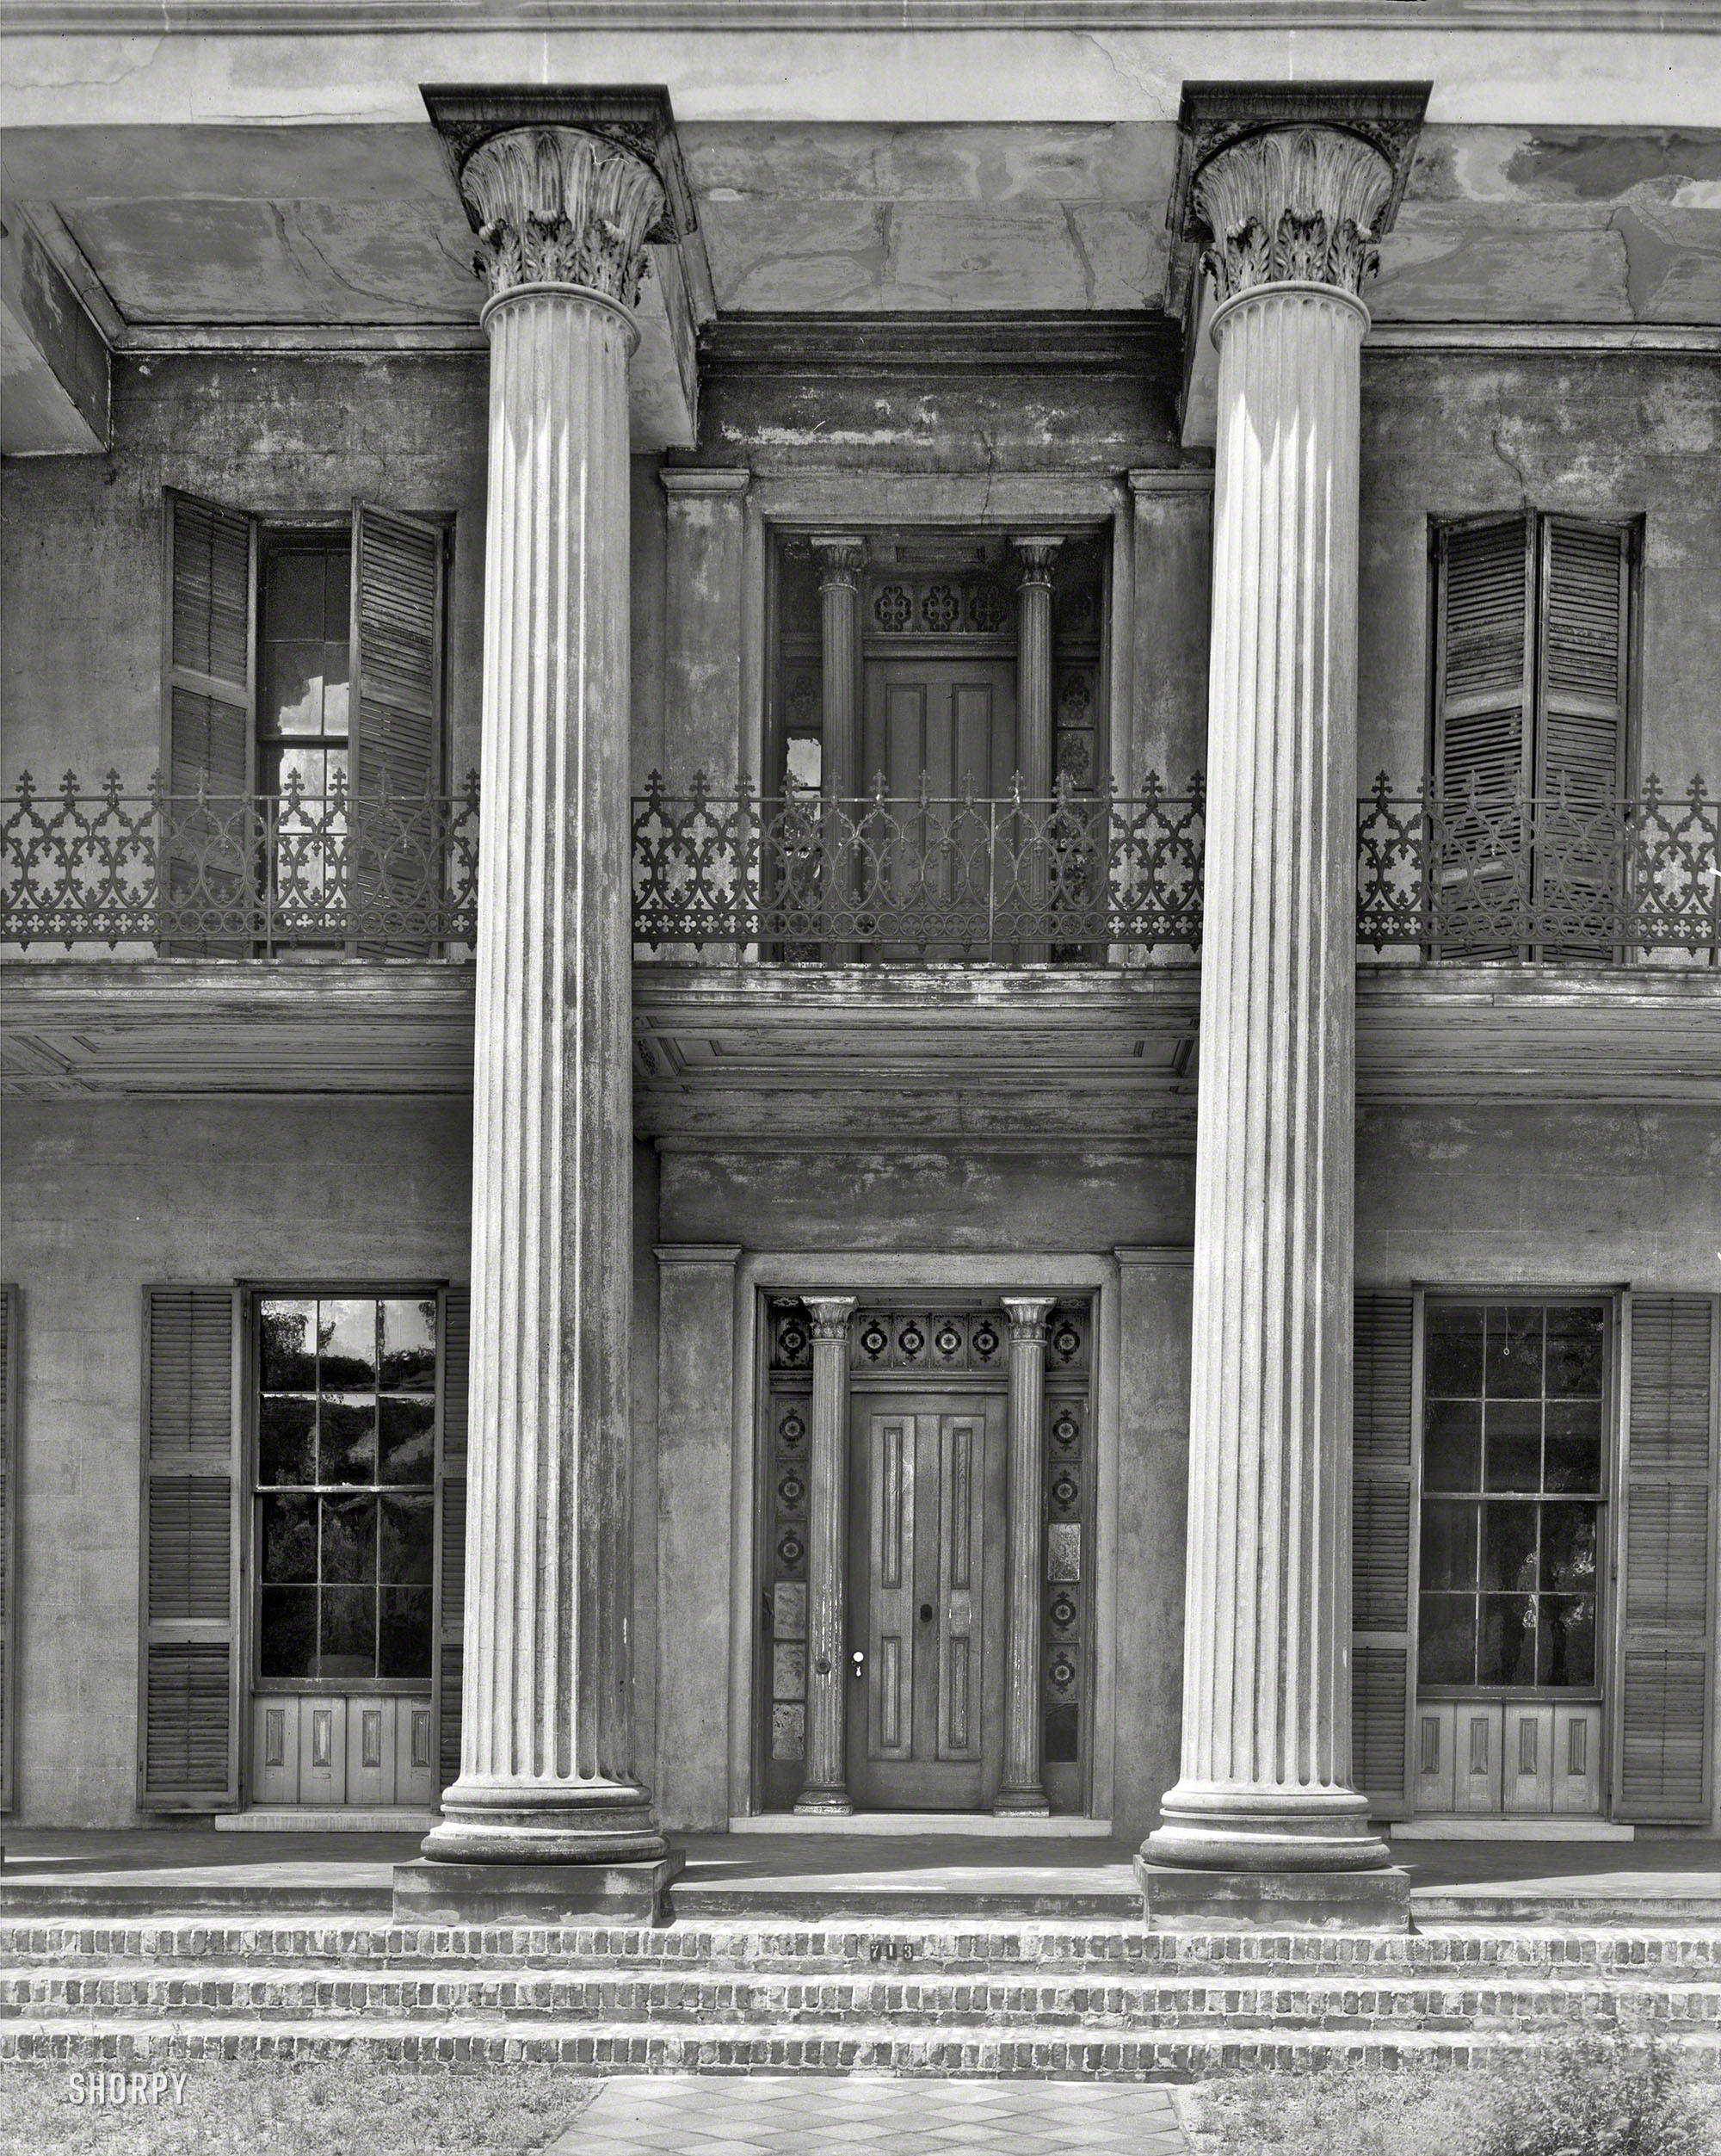 1939. "Watts-Parkman-Gillman House, 713 Mabry Street, Selma, Dallas County, Alabama. Two-story masonry construction dates to 1852. Greek Revival stone columns across front. Fine ironwork on second-story balcony." 8x10 inch acetate negative by Frances Benjamin Johnston. View full size.